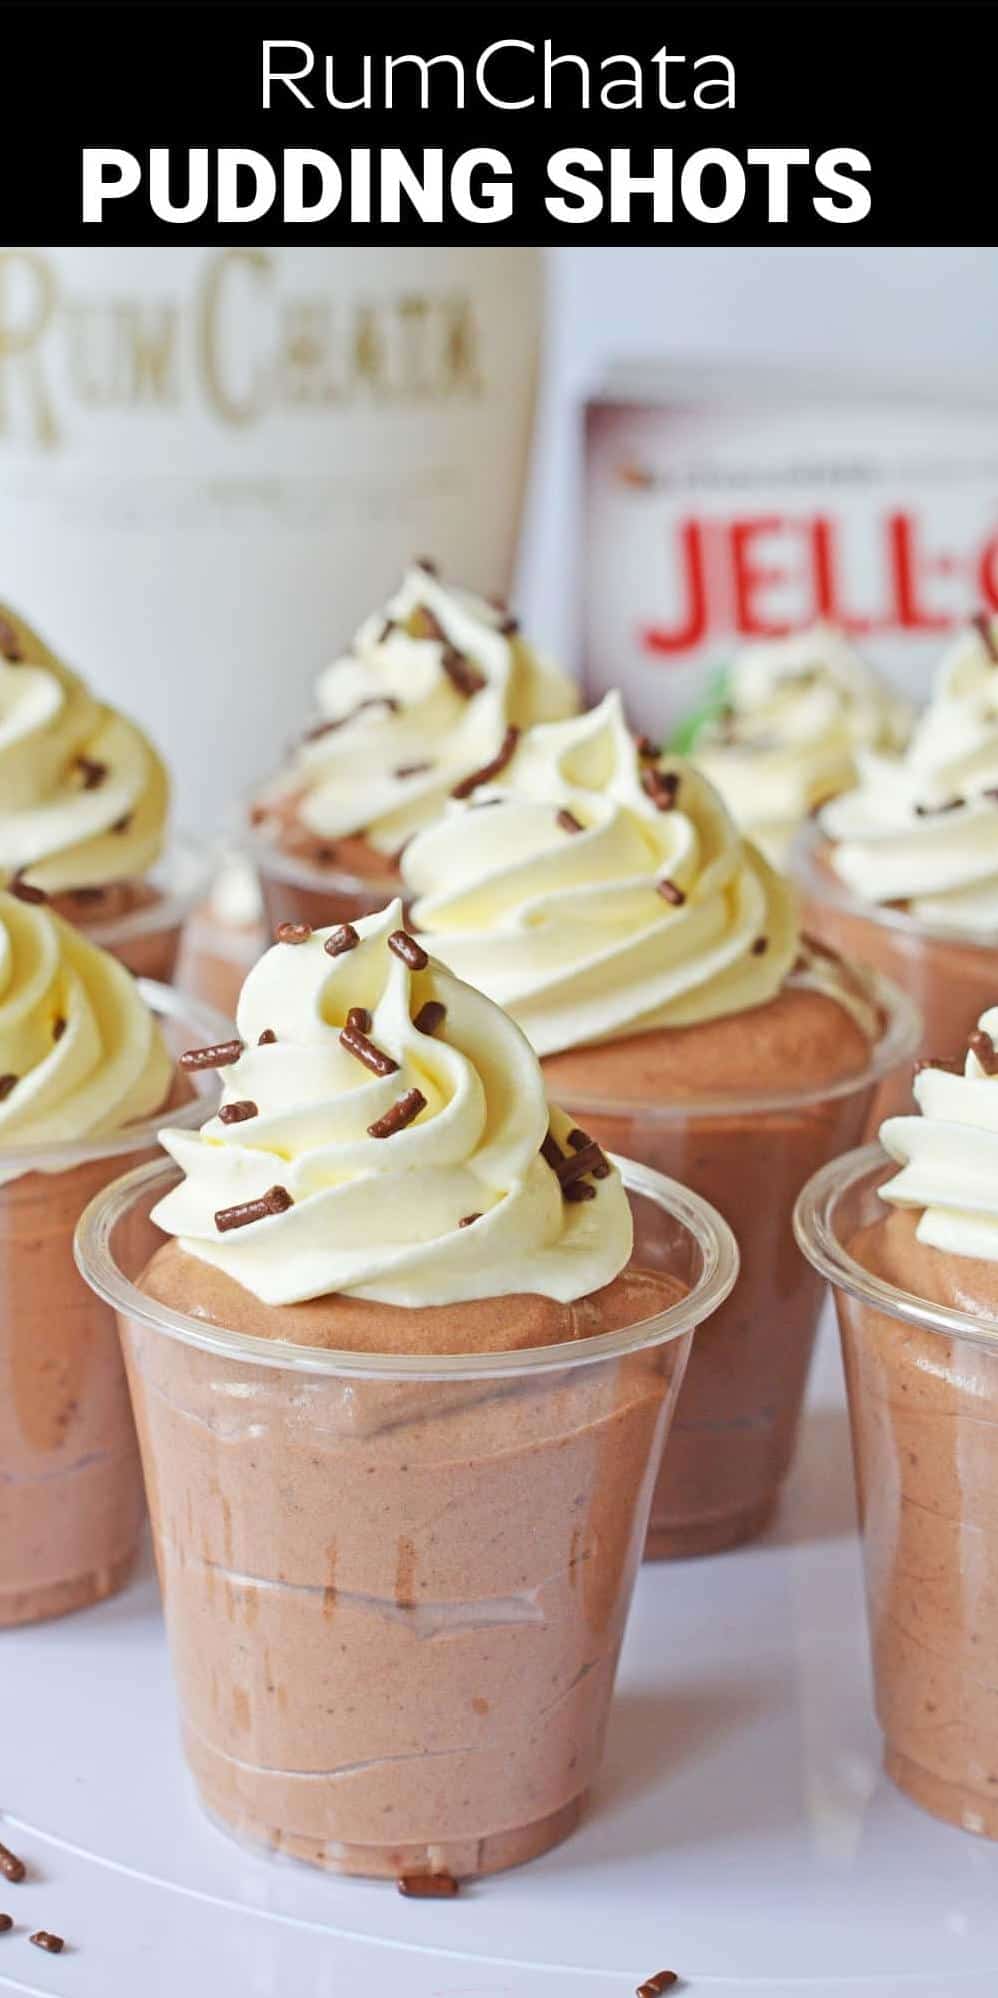  These Jello shots will definitely steal the party's spotlight.